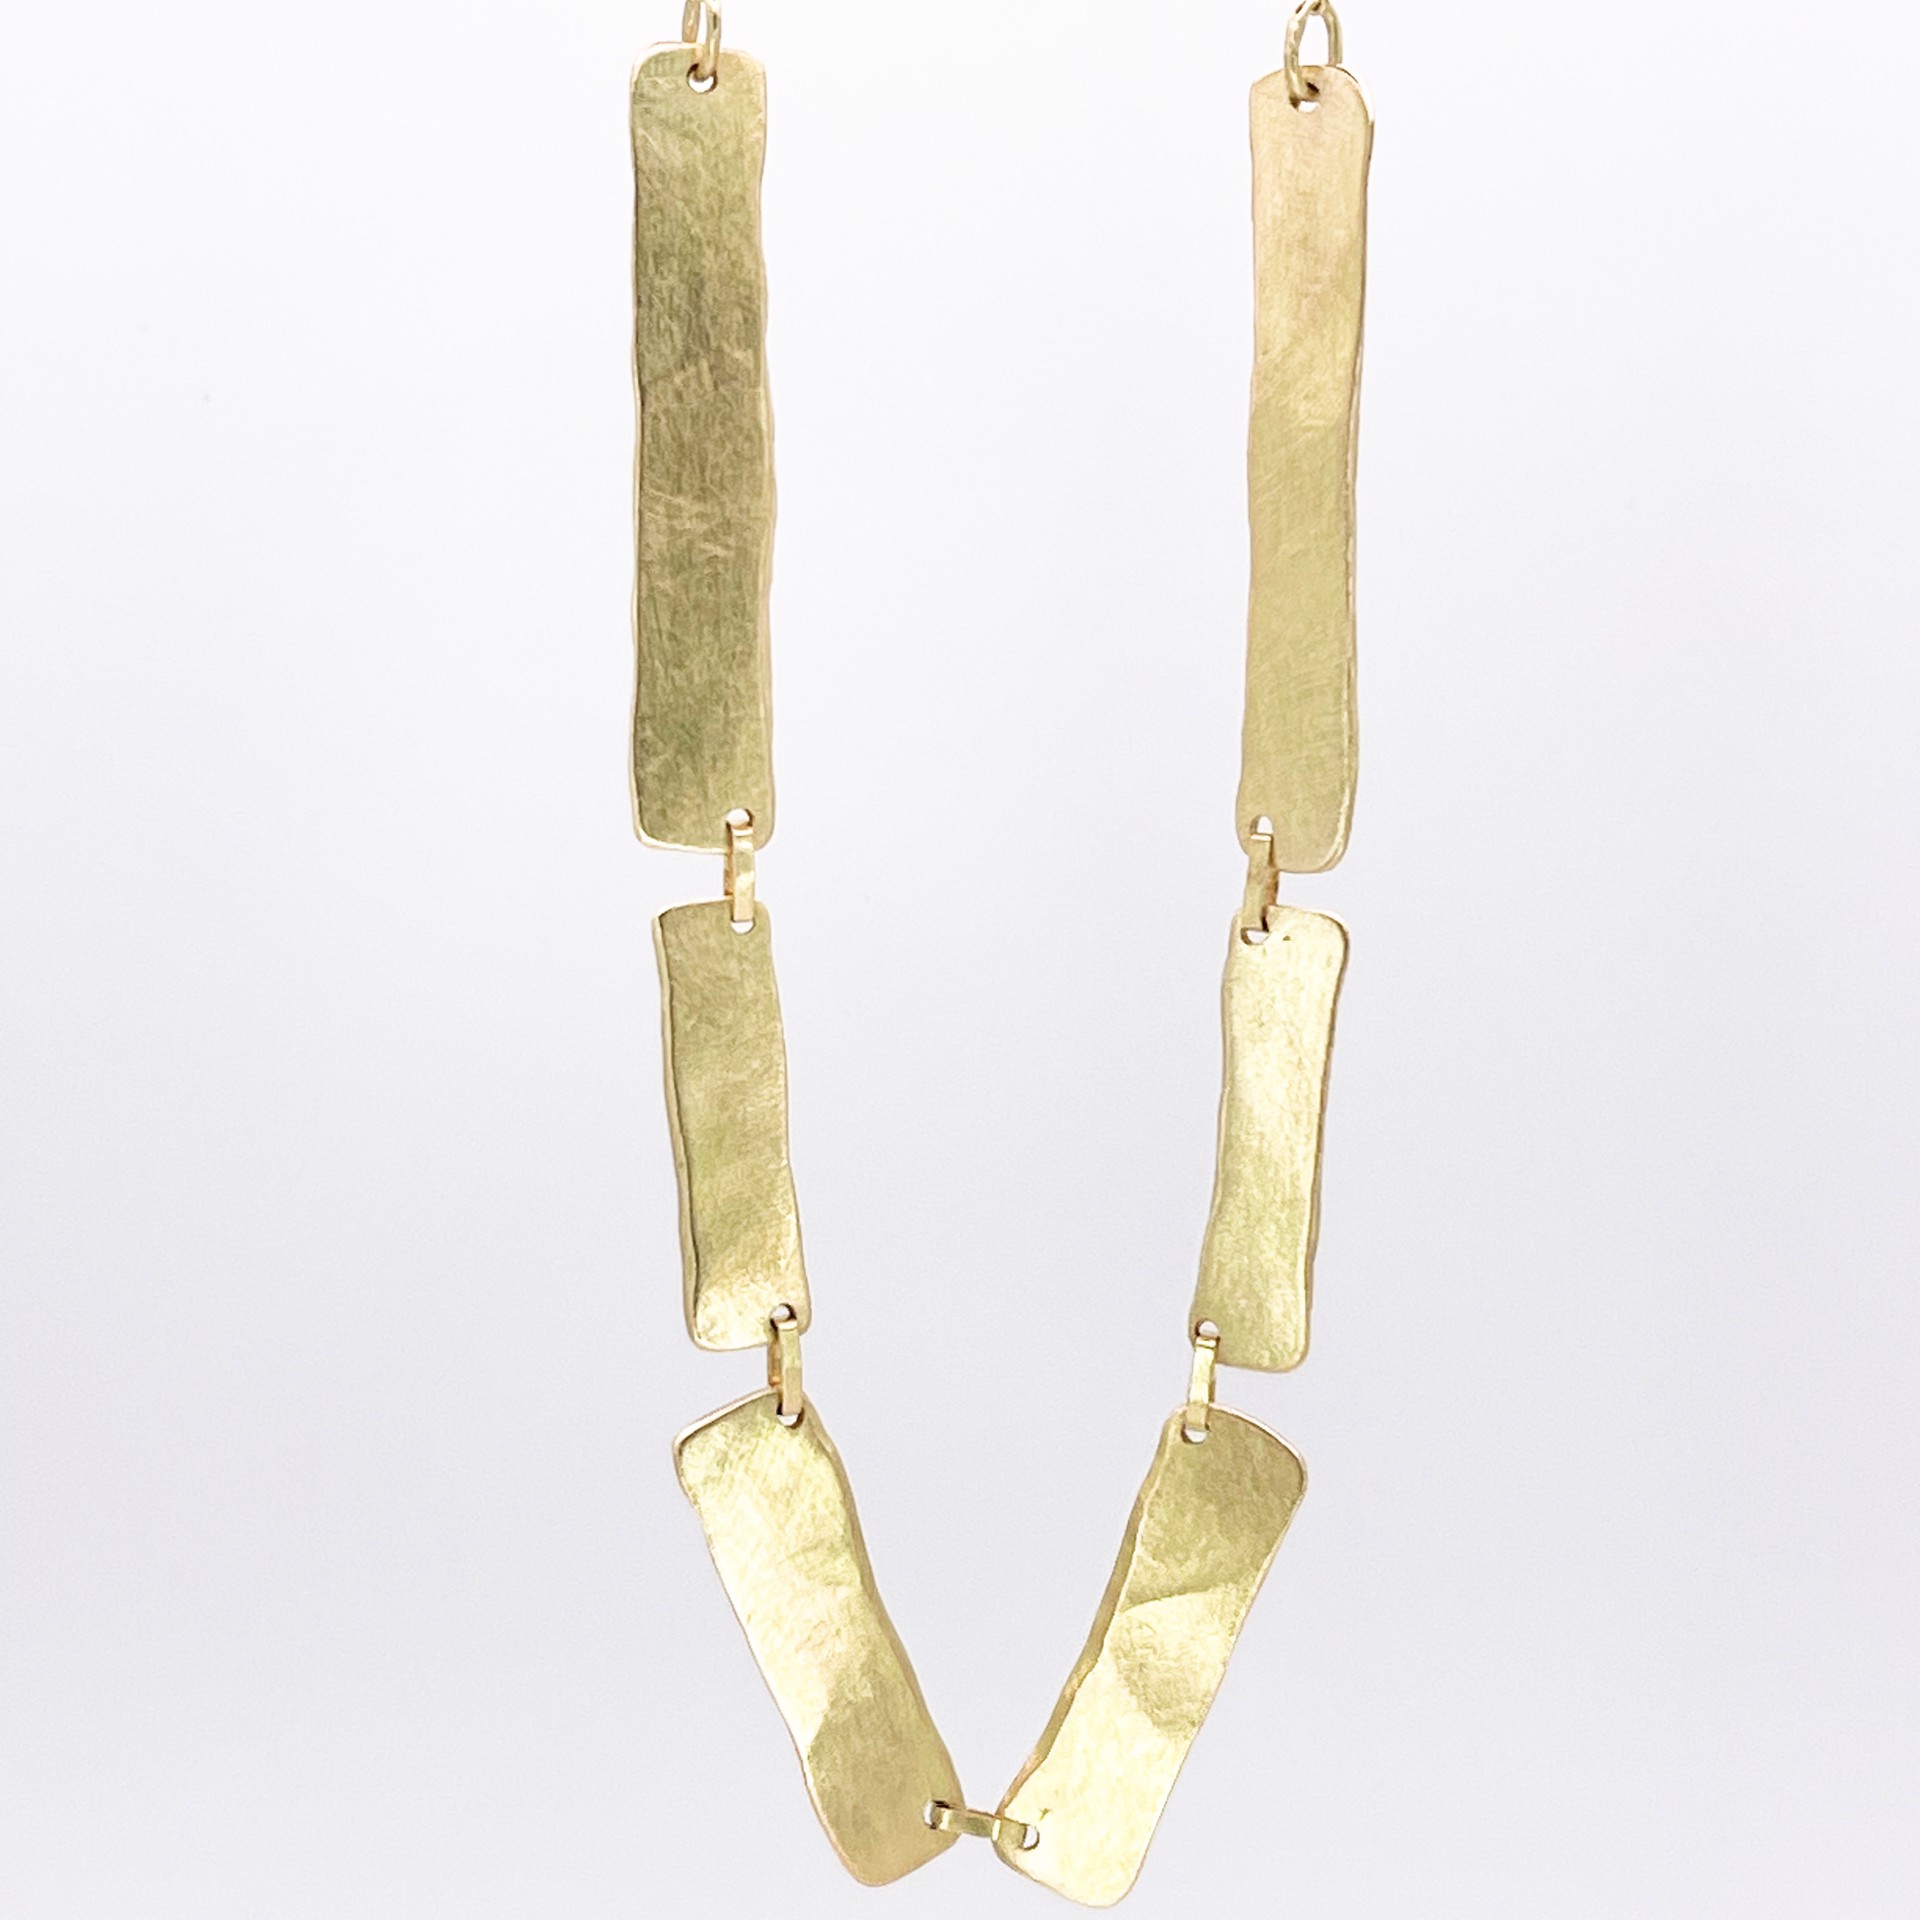 LHN08- 5 Rectangles 18k gold by Leandra Hill